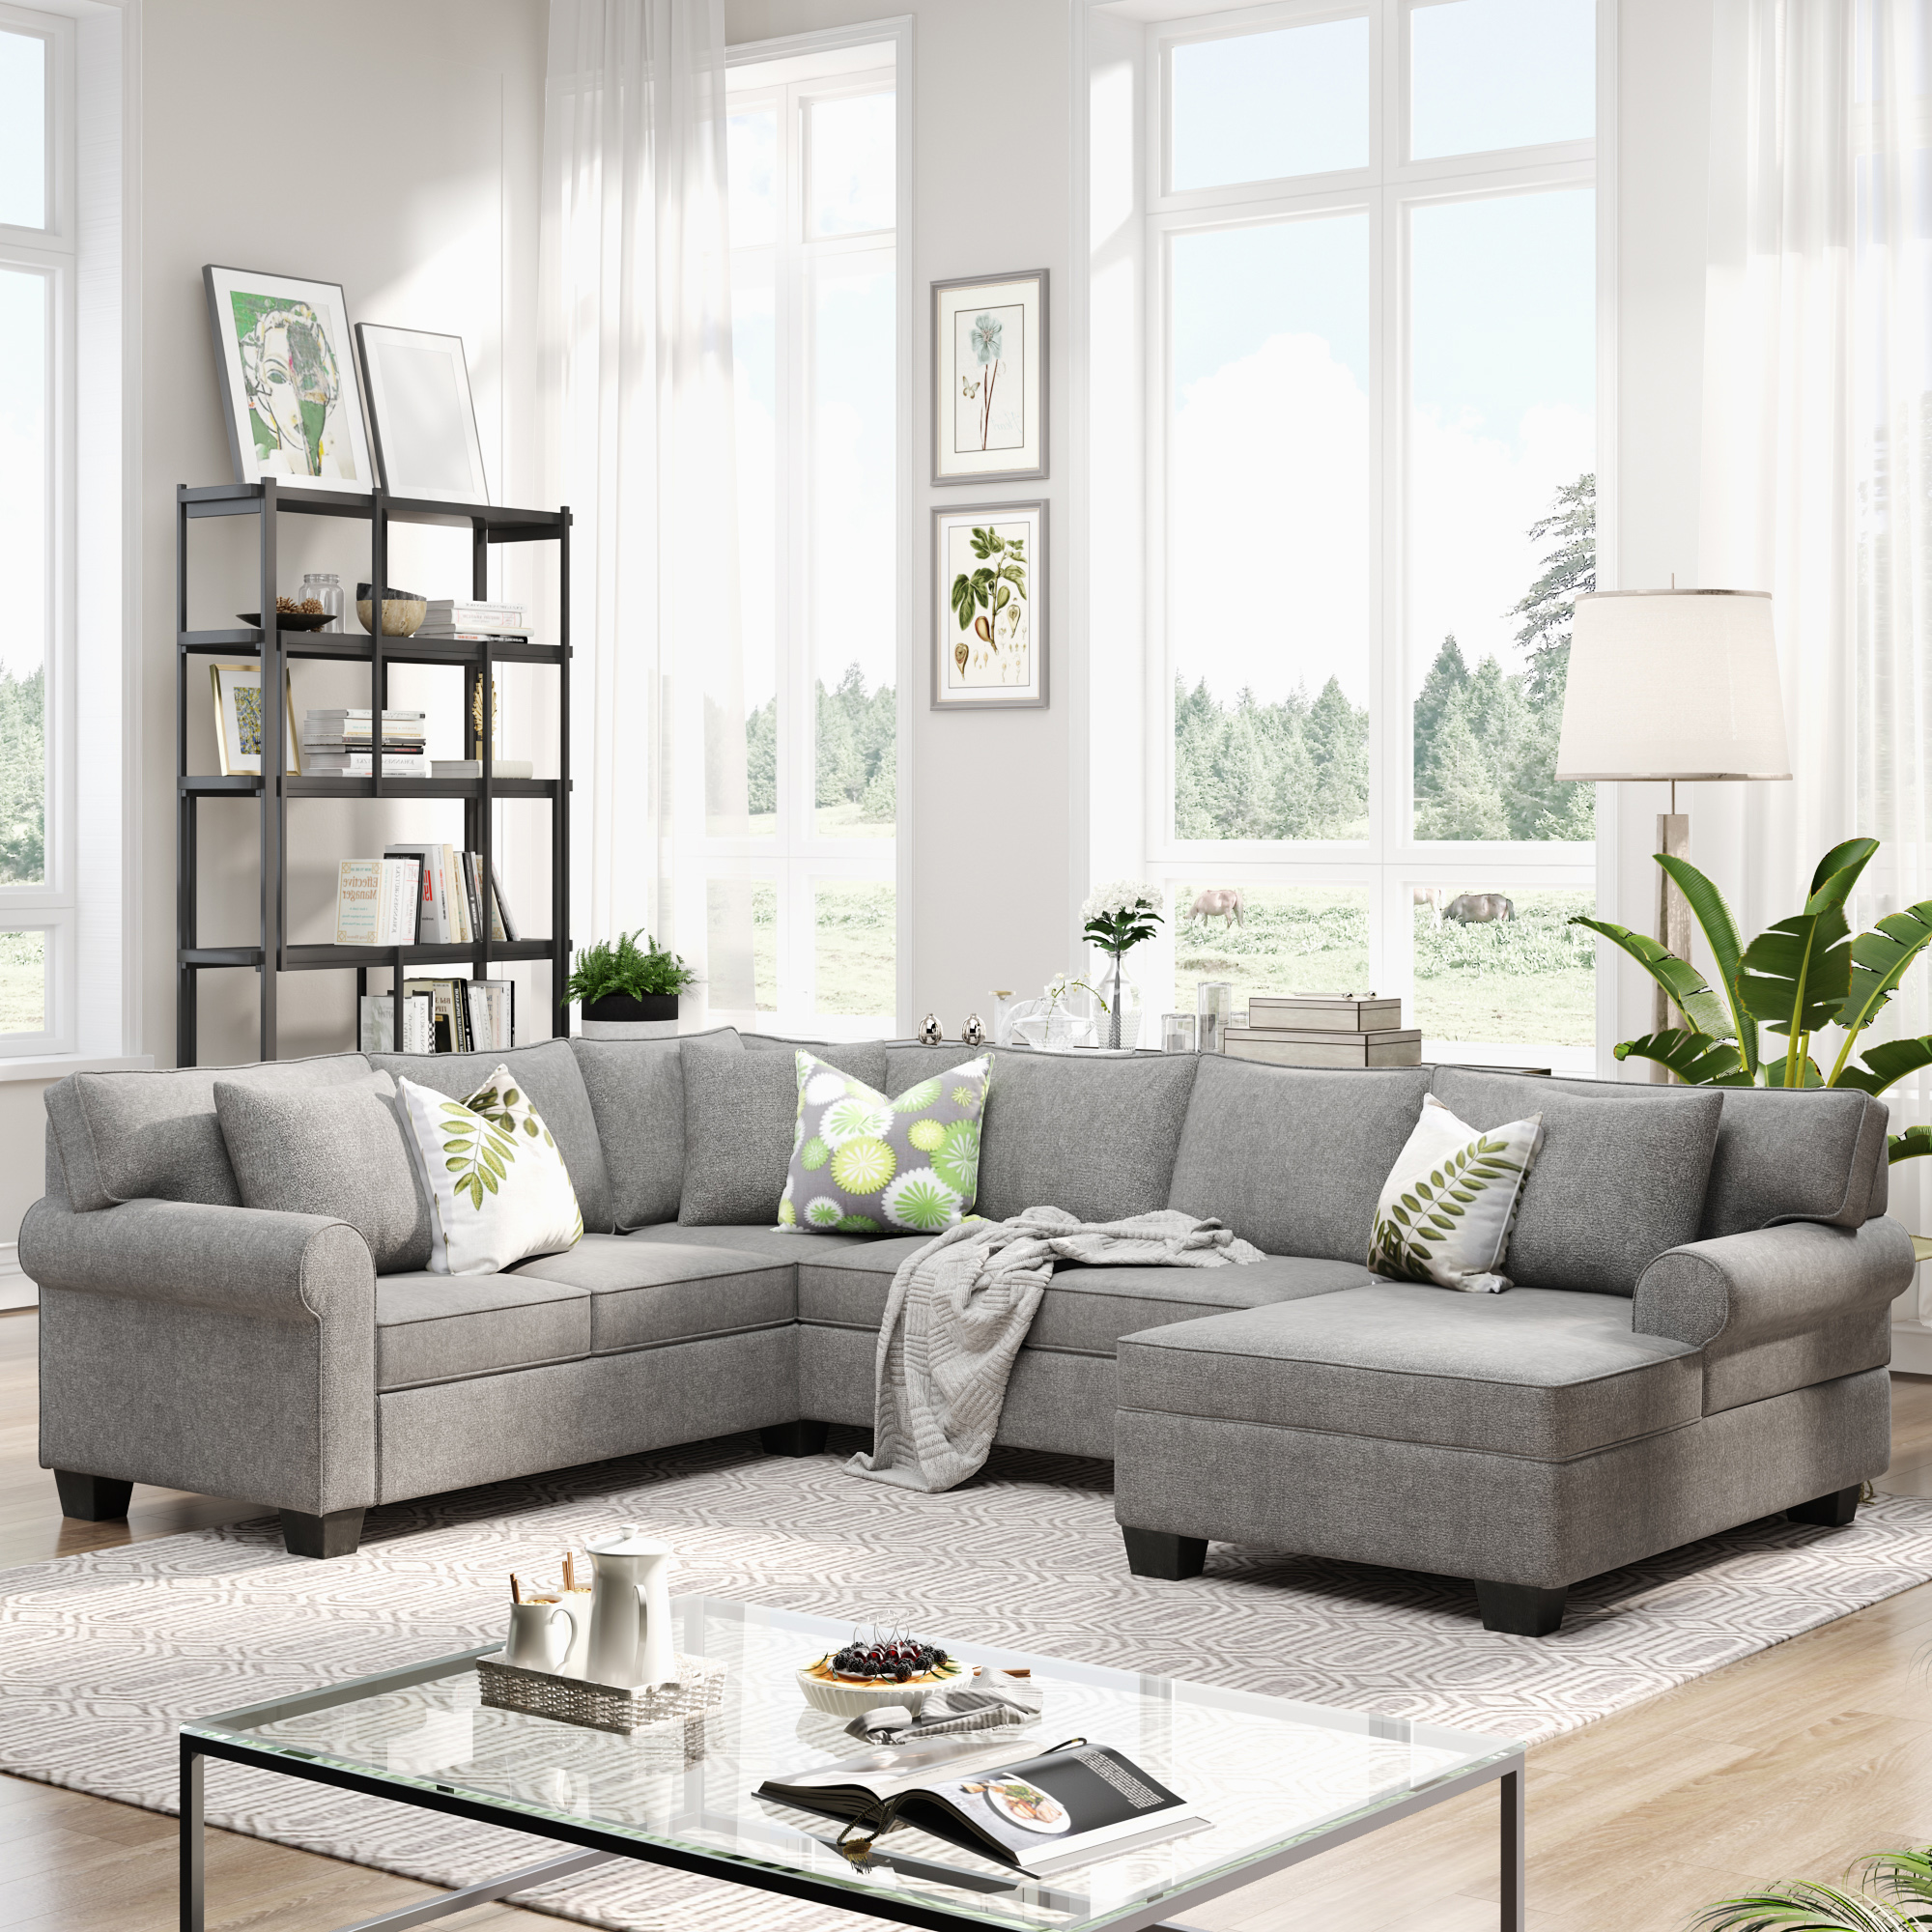 Classic Chesterfield Sectional Sofa with 3 Pillows - GS005022AAE